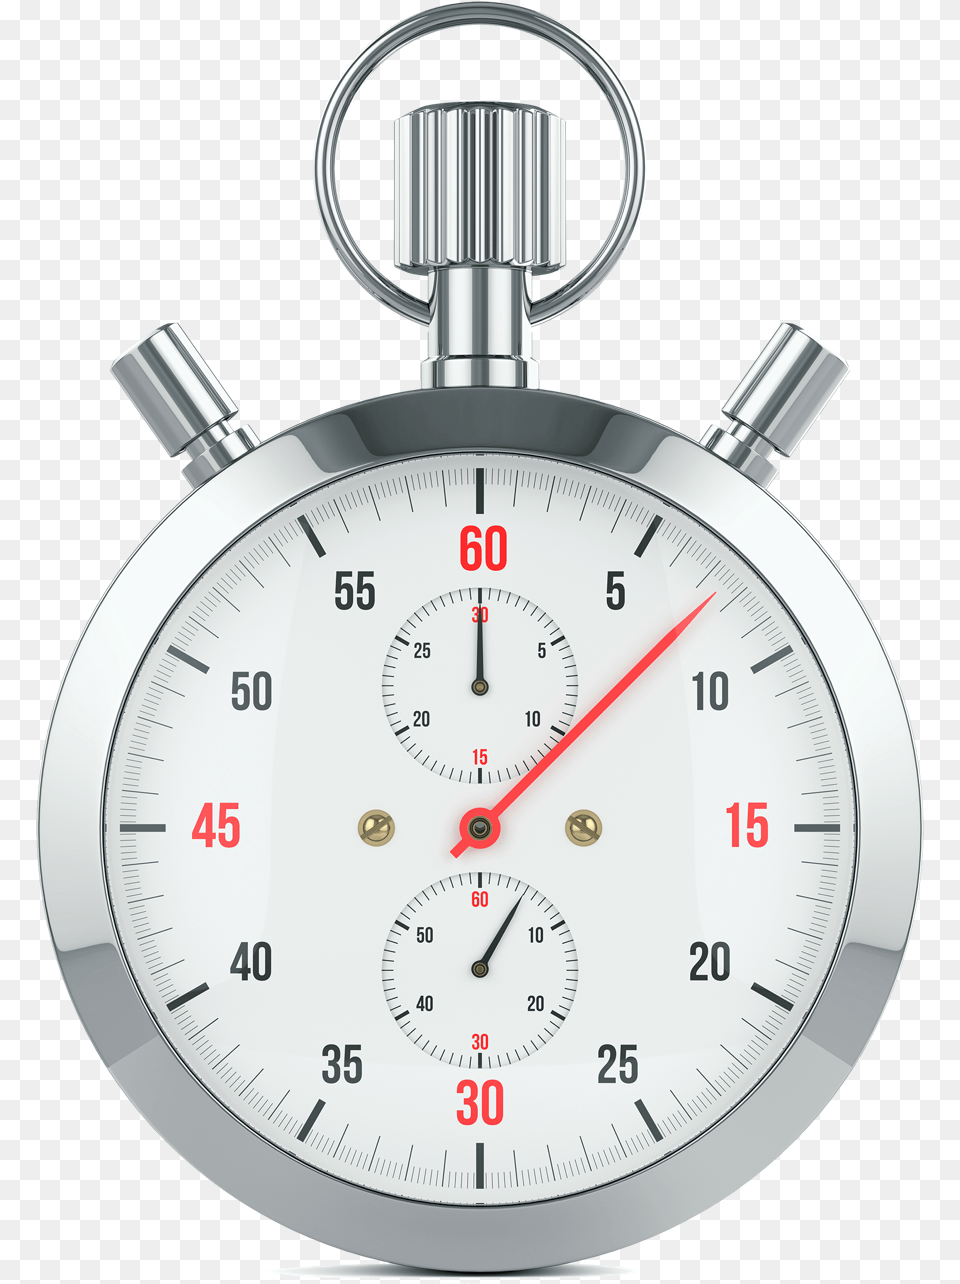 Beyond You Will Be Equipped With A Value Creating Stopwatch Png Image